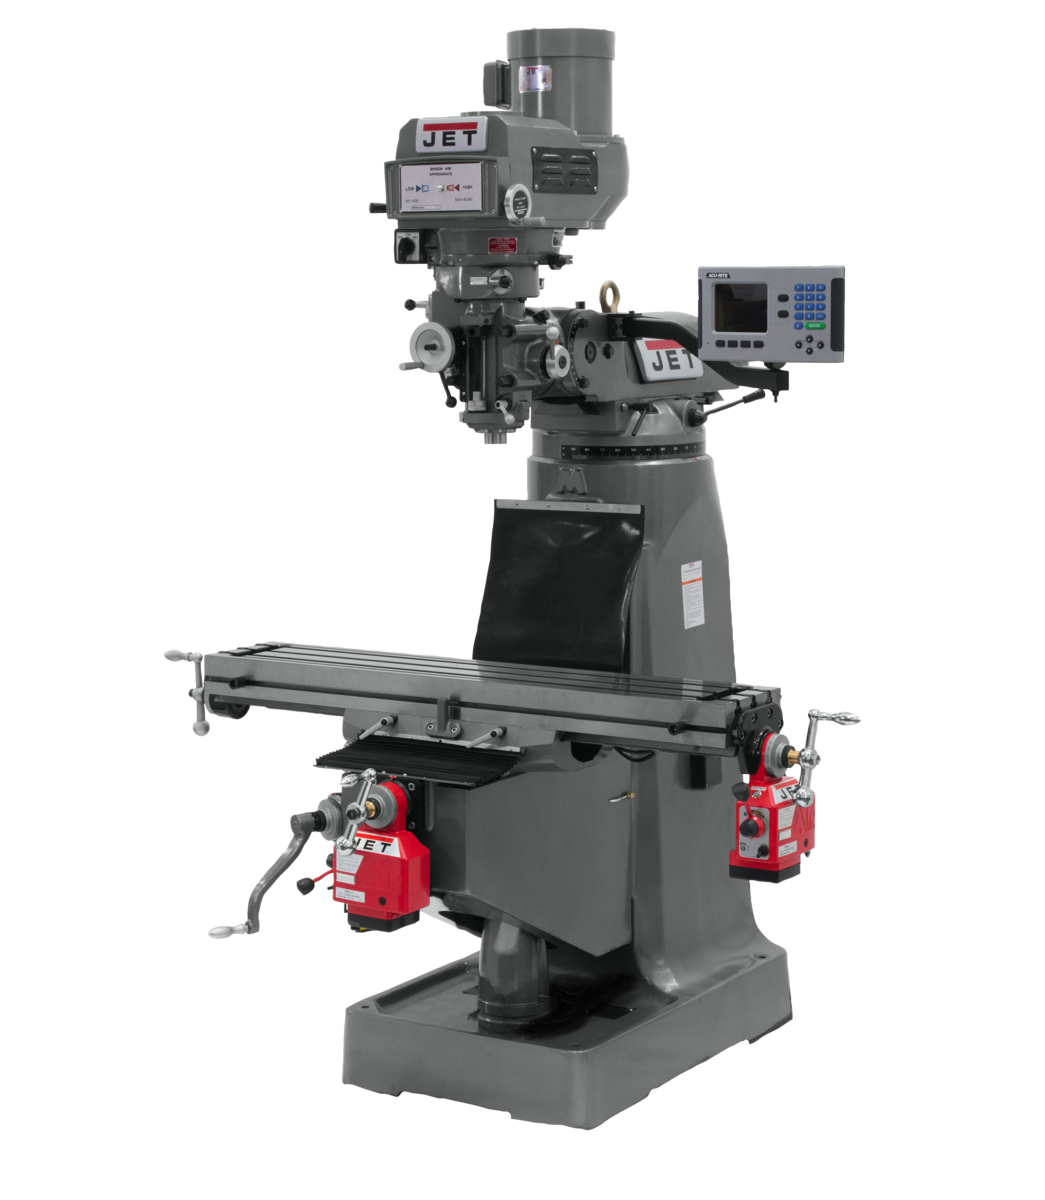 JTM-4VS-1 Mill With 3-Axis ACU-RITE 203 DRO (Quill) With X and Y-Axis Powerfeeds